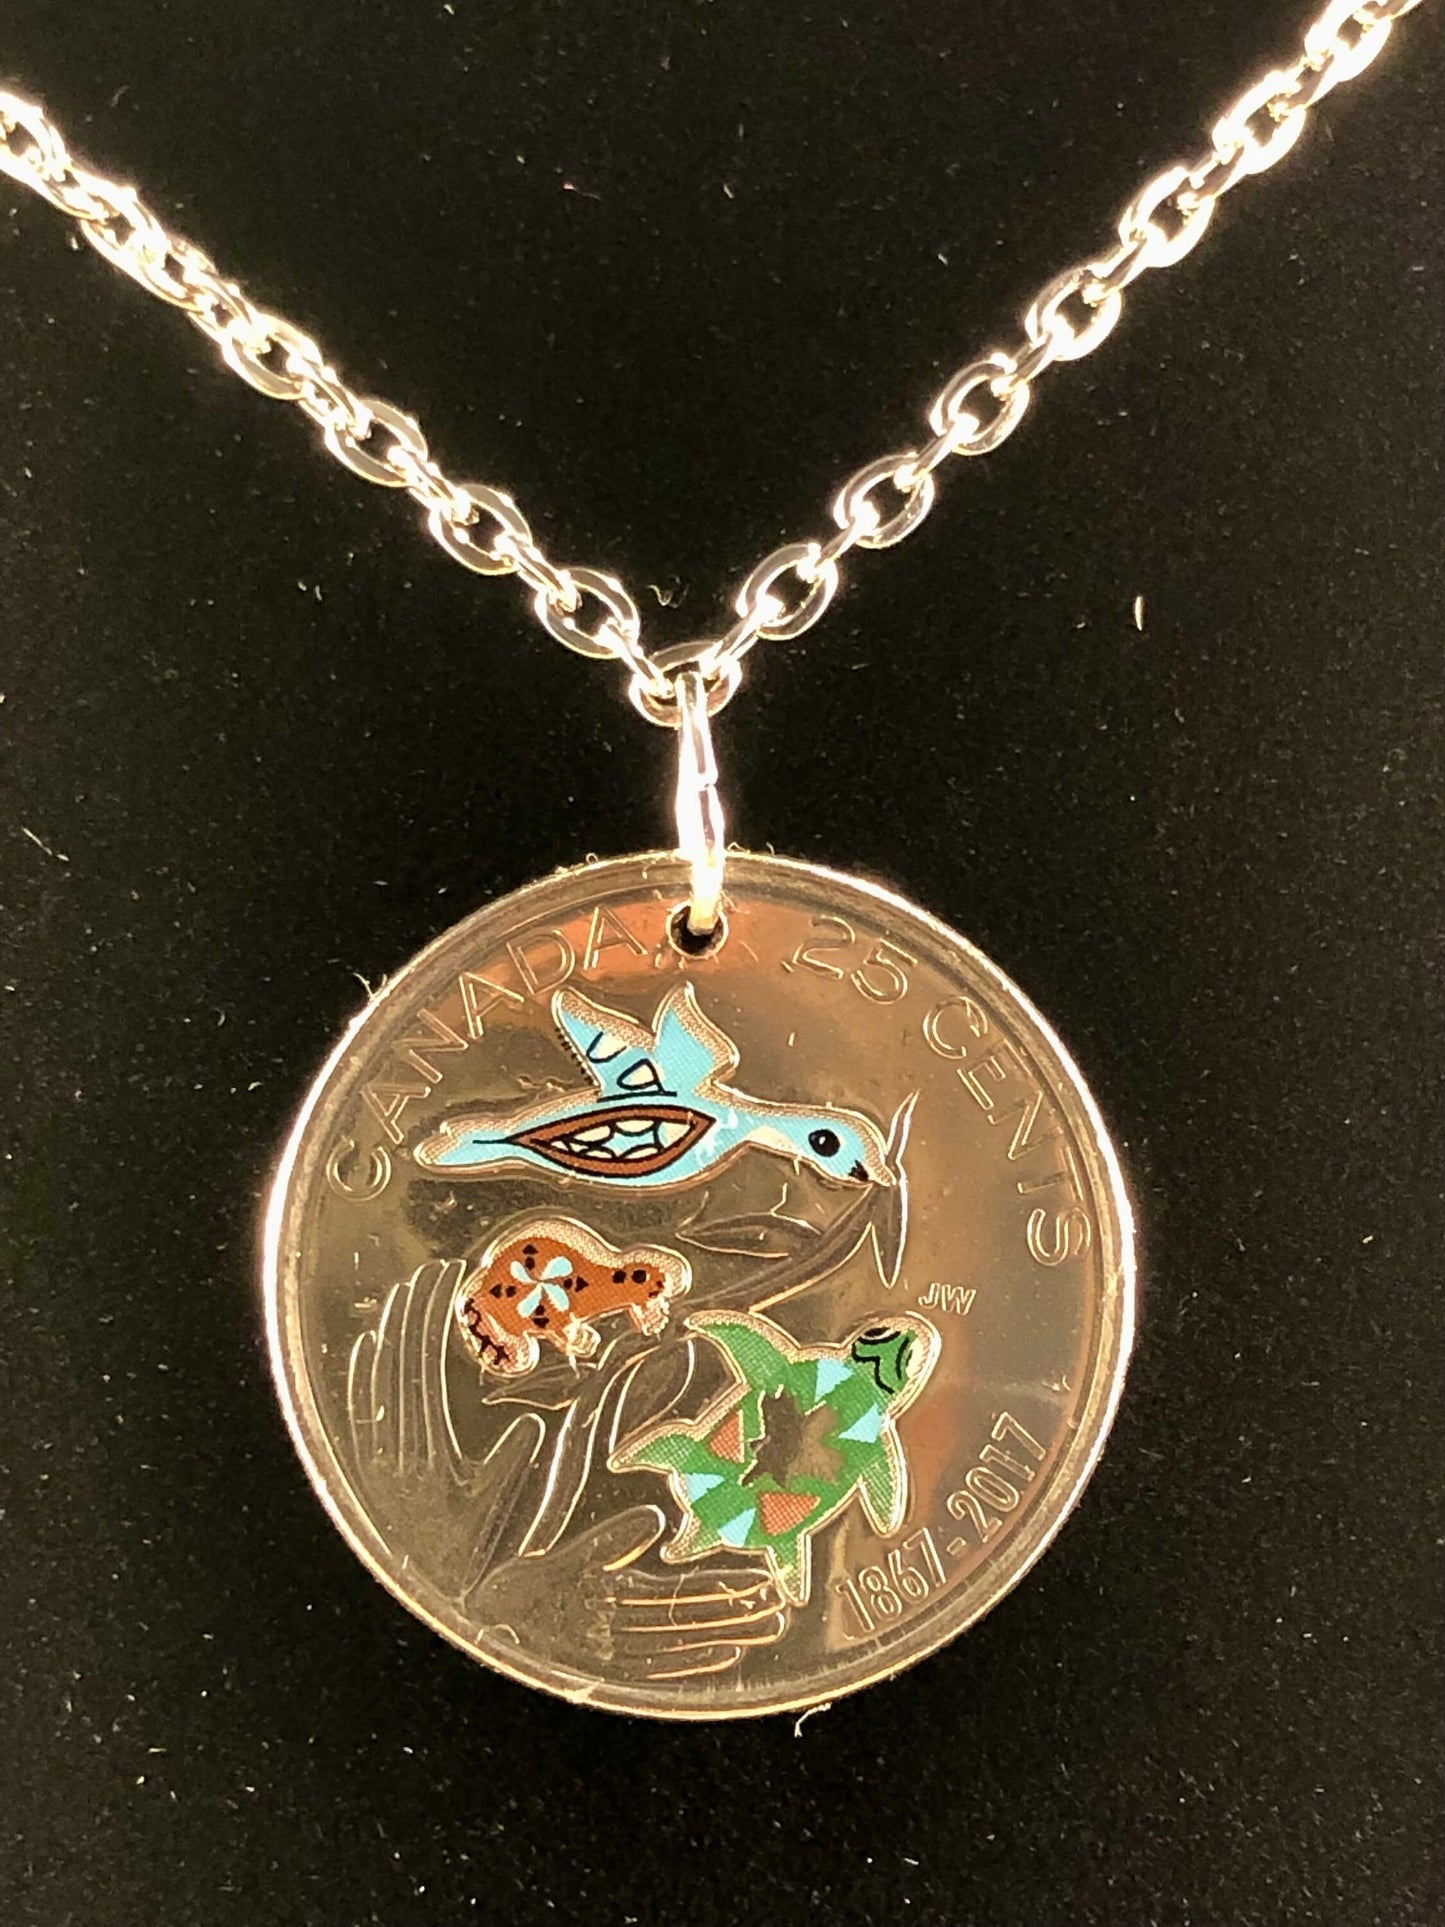 Canadian Quarter Necklace Pendant Canada 2017 25 Turtles Custom Made Vintage and Rare coins - Coin Enthusiast Handmade